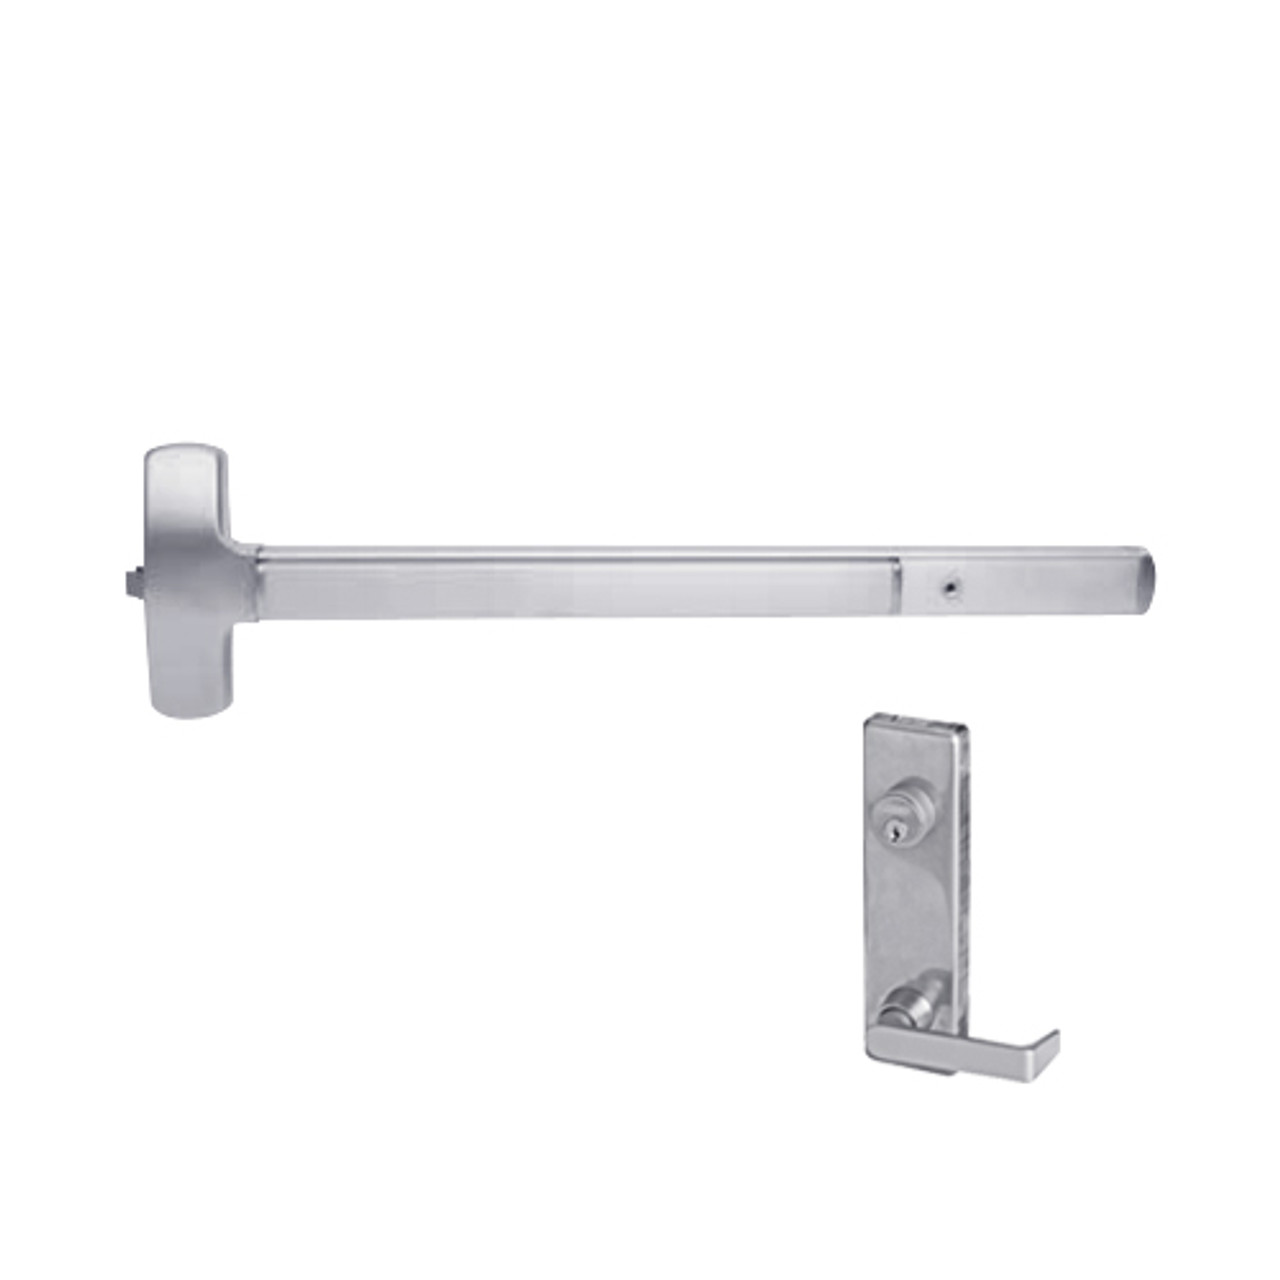 25-R-L-DANE-US32-4-LHR Falcon Exit Device in Polished Stainless Steel